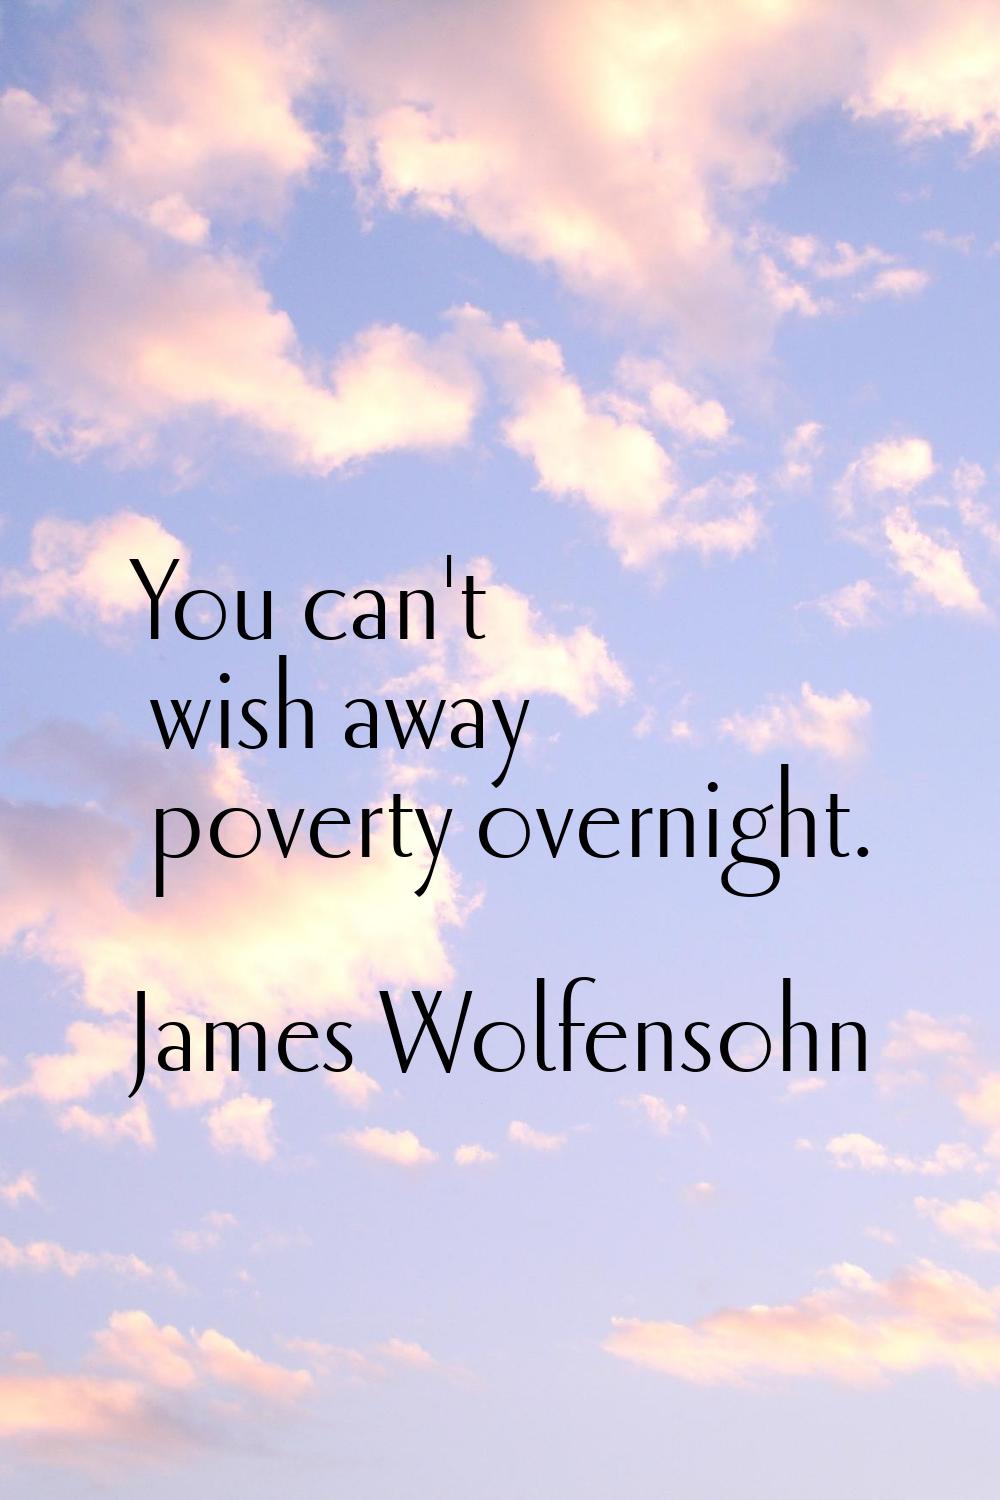 You can't wish away poverty overnight.